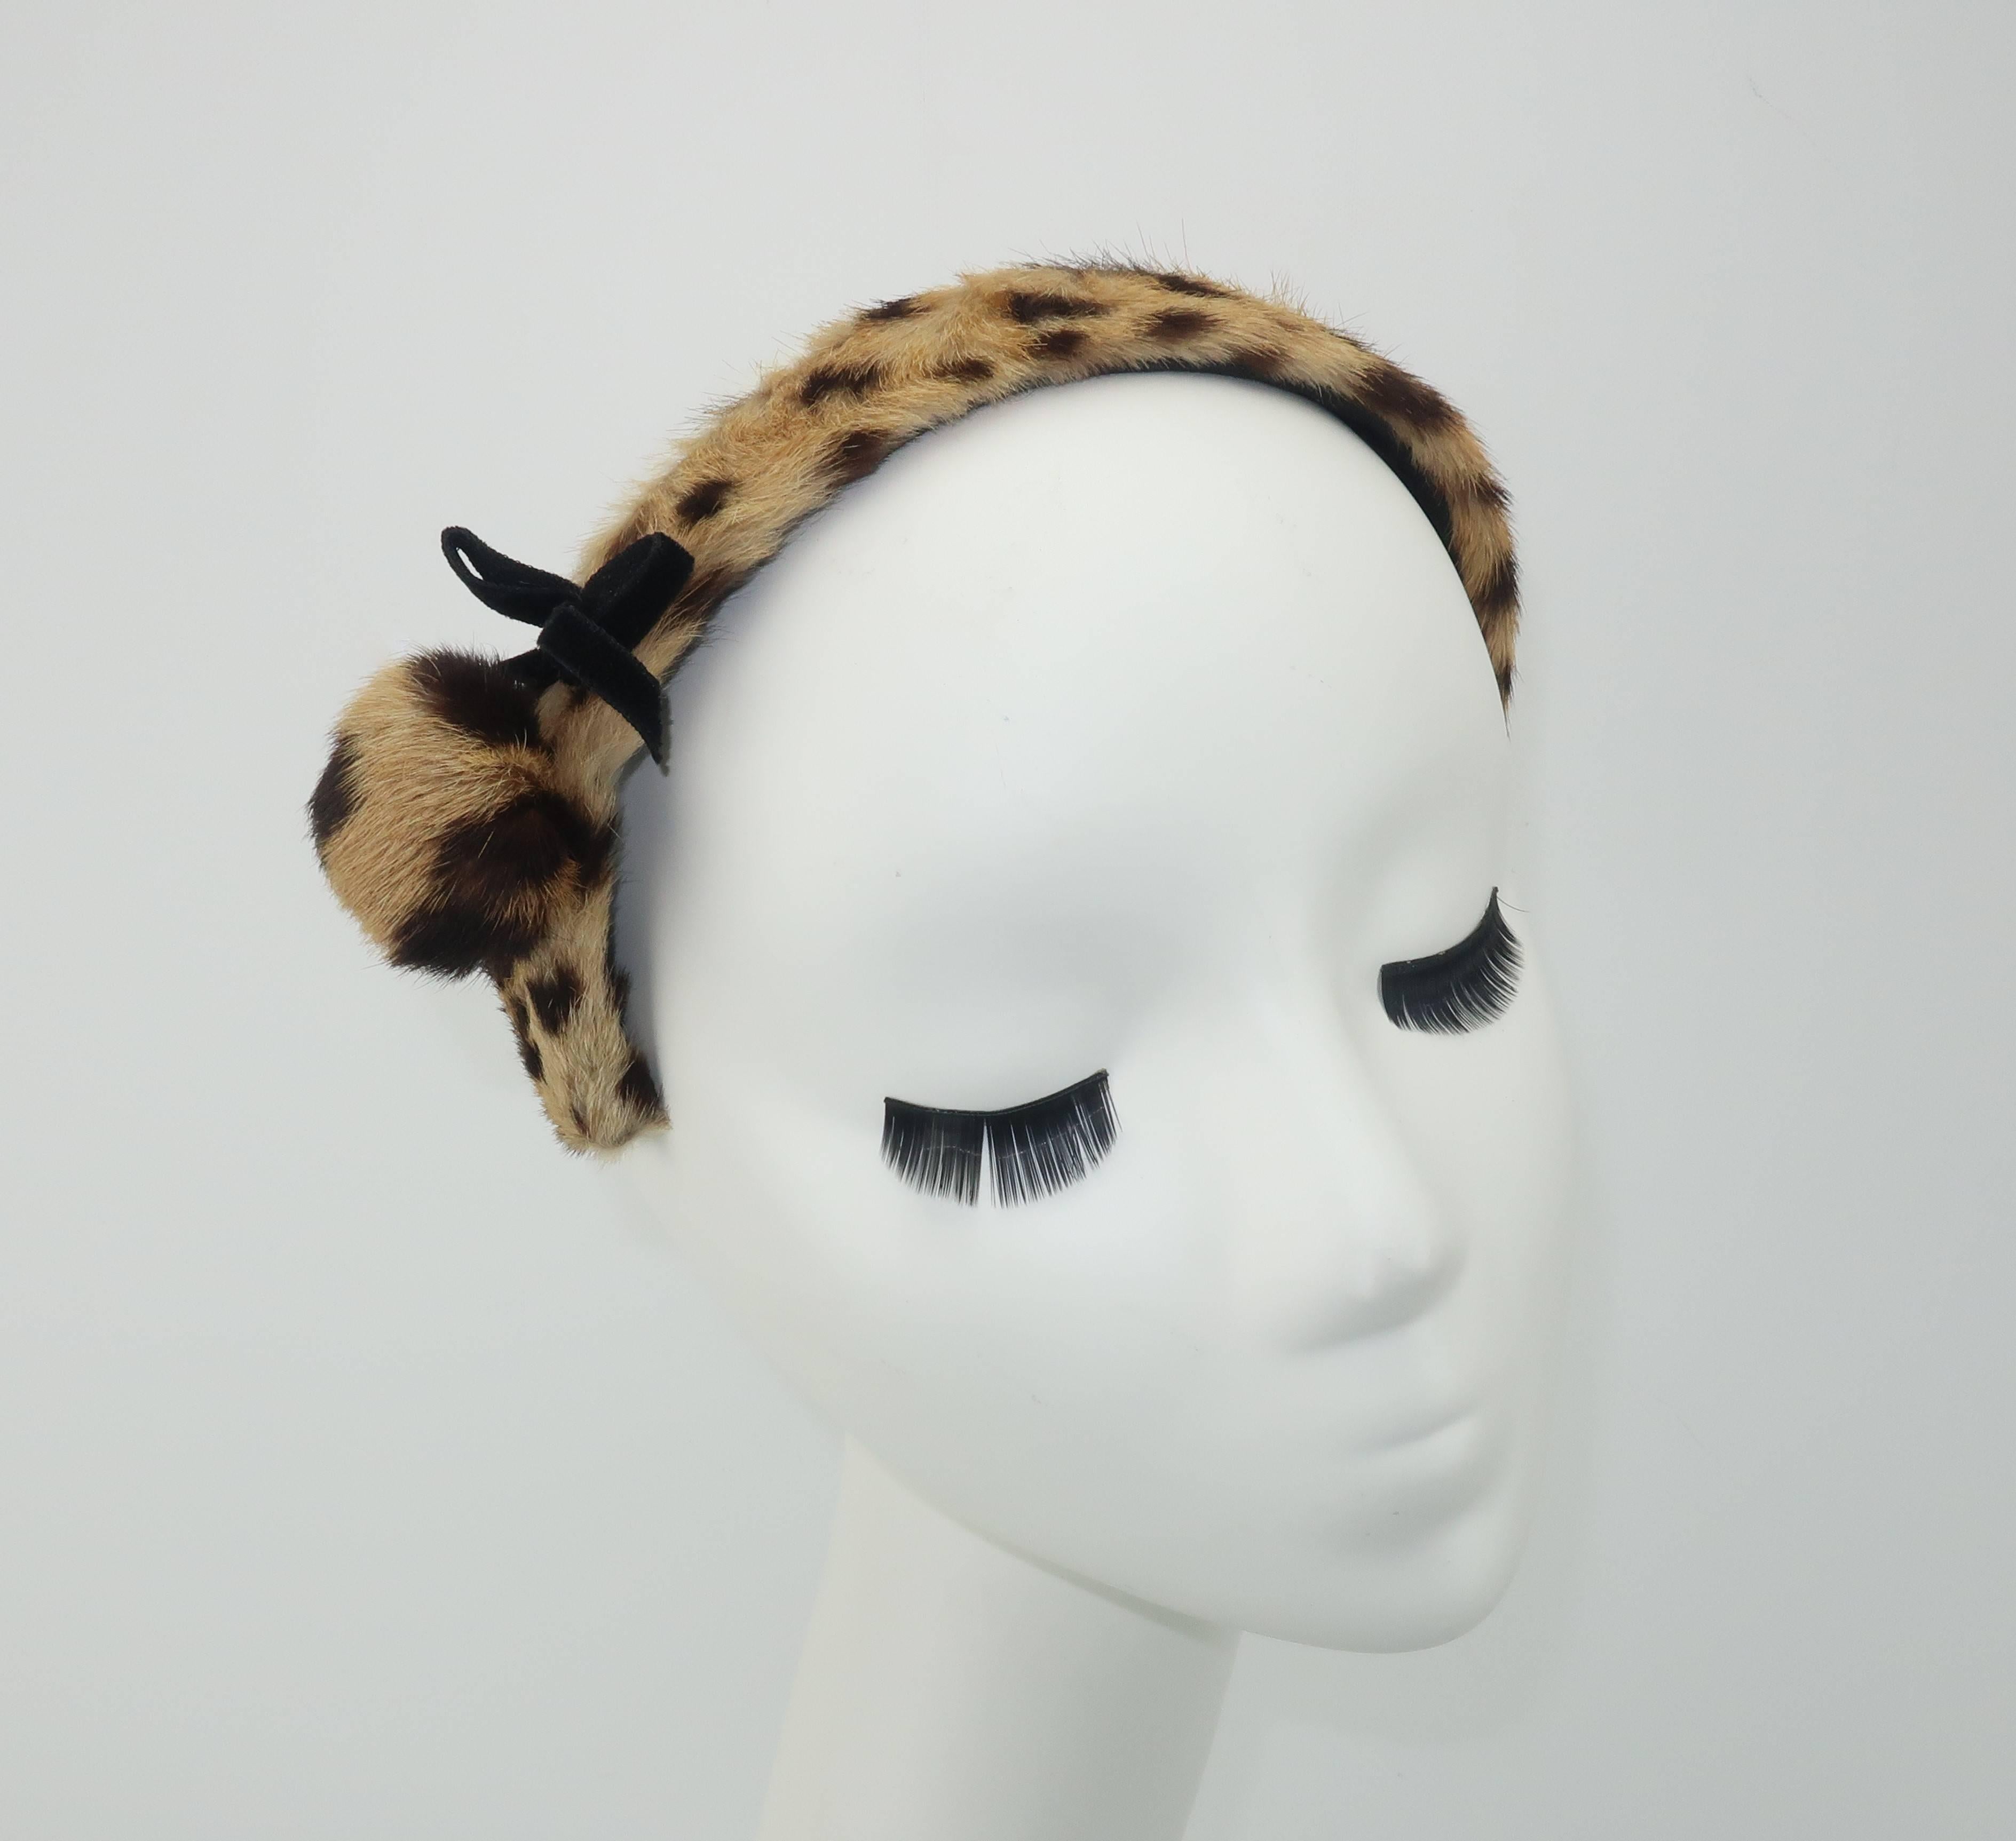 Cute, coquettish and chic!  This precious 1950’s headband by Therese Ahrens has elements of a pin-up girl look with a fashionable sensibility perfect for adding a vintage accessory to your look.  The headband measures 12.25